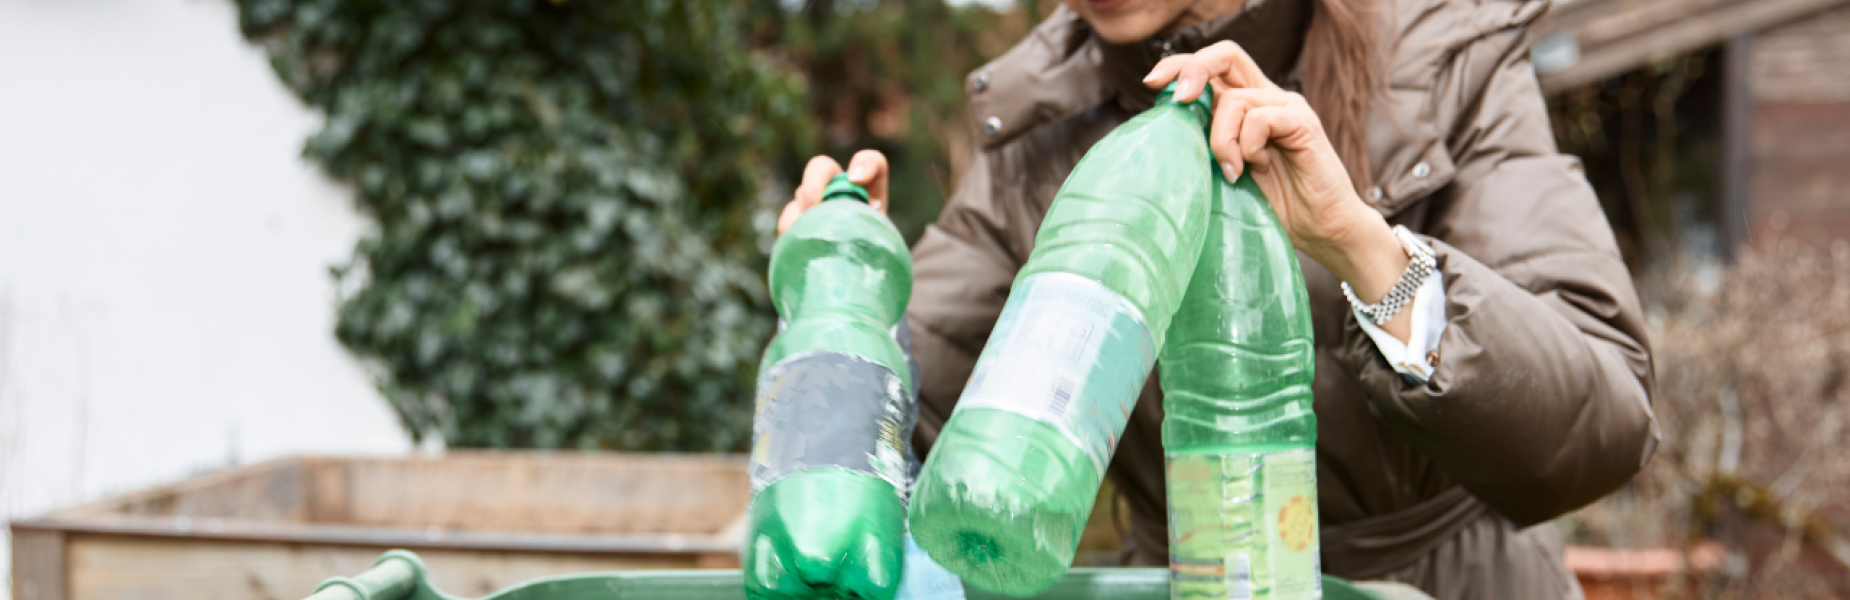 A woman recycling plastic bottles